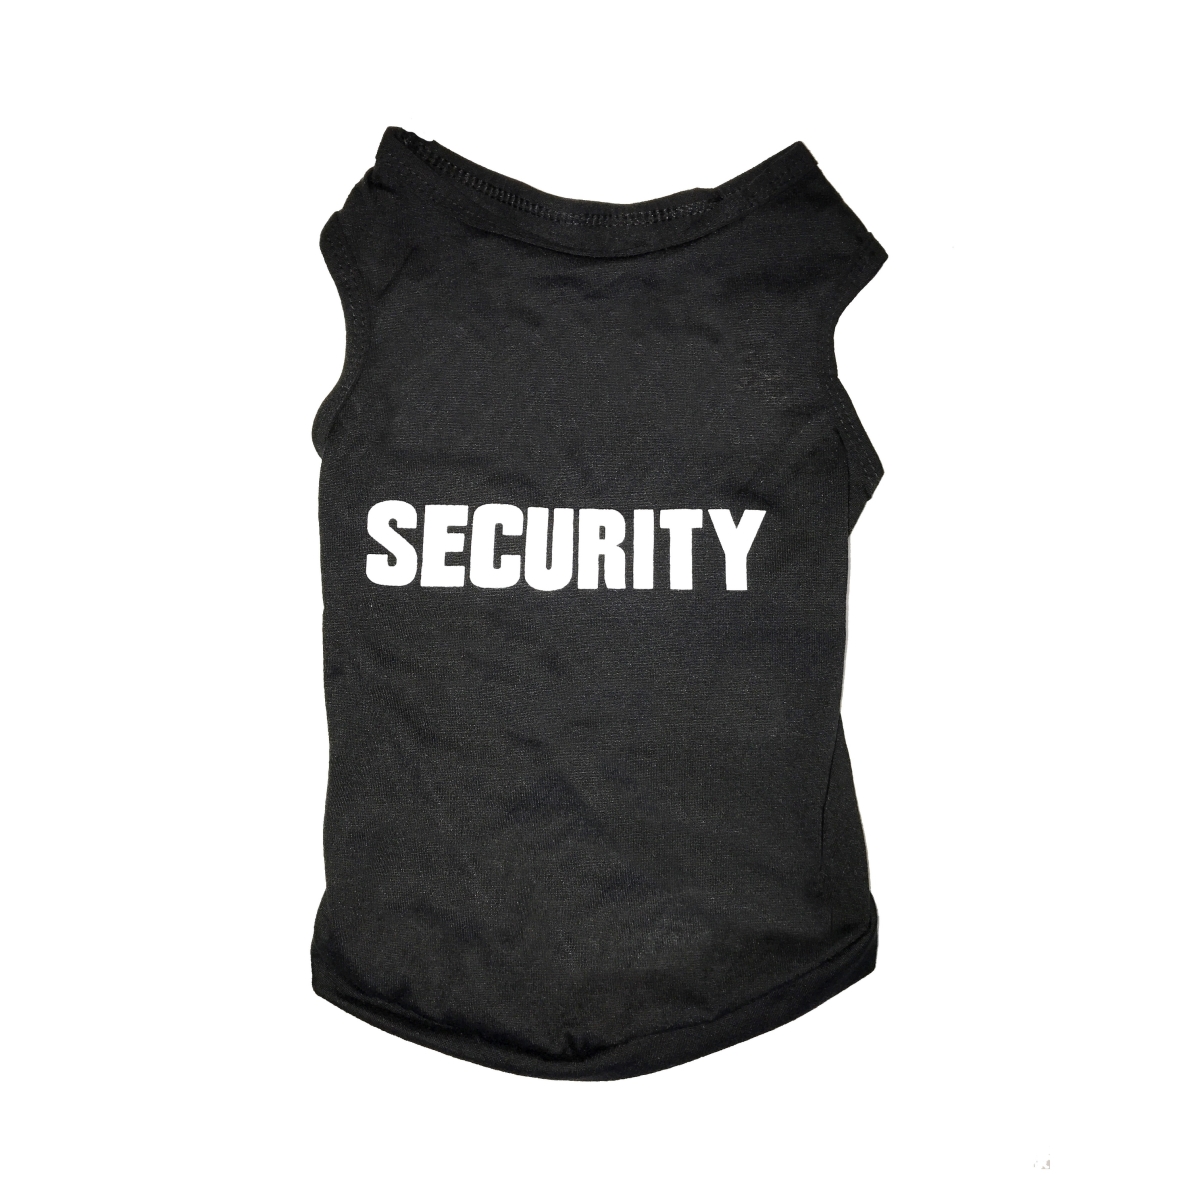 Dgsect-s Security Tee, Black - Small